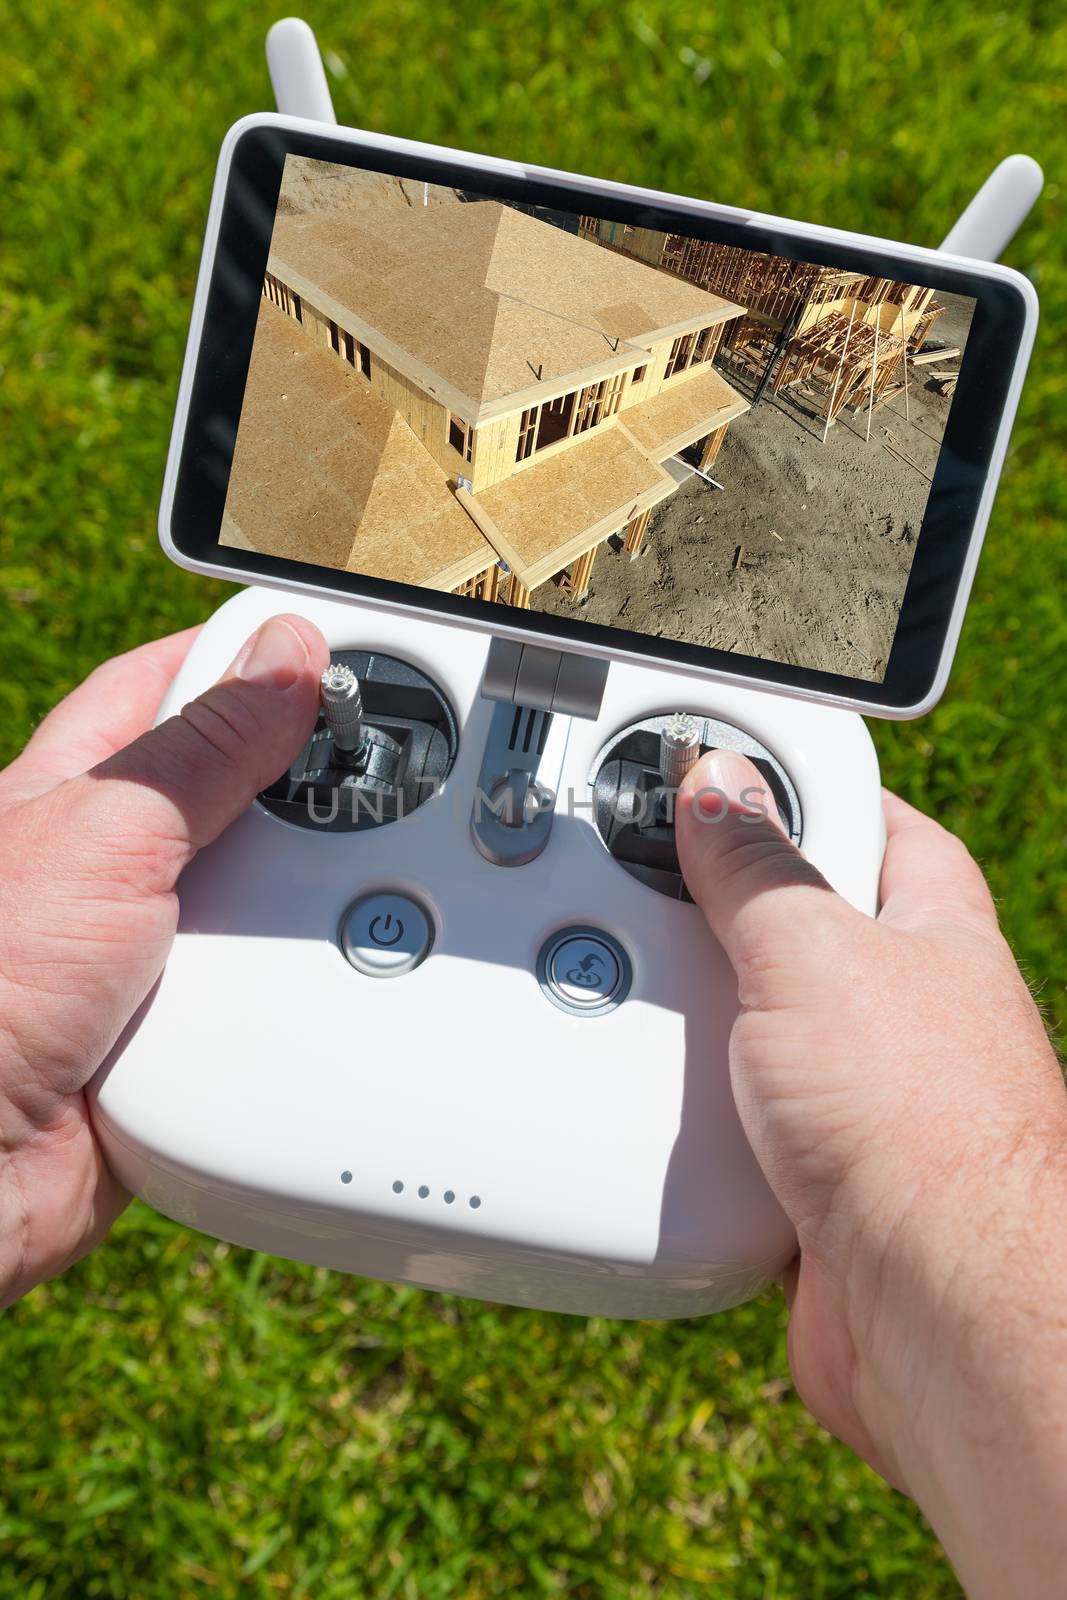 Hands Holding Drone Quadcopter Controller With Construction House Framing on Screen.